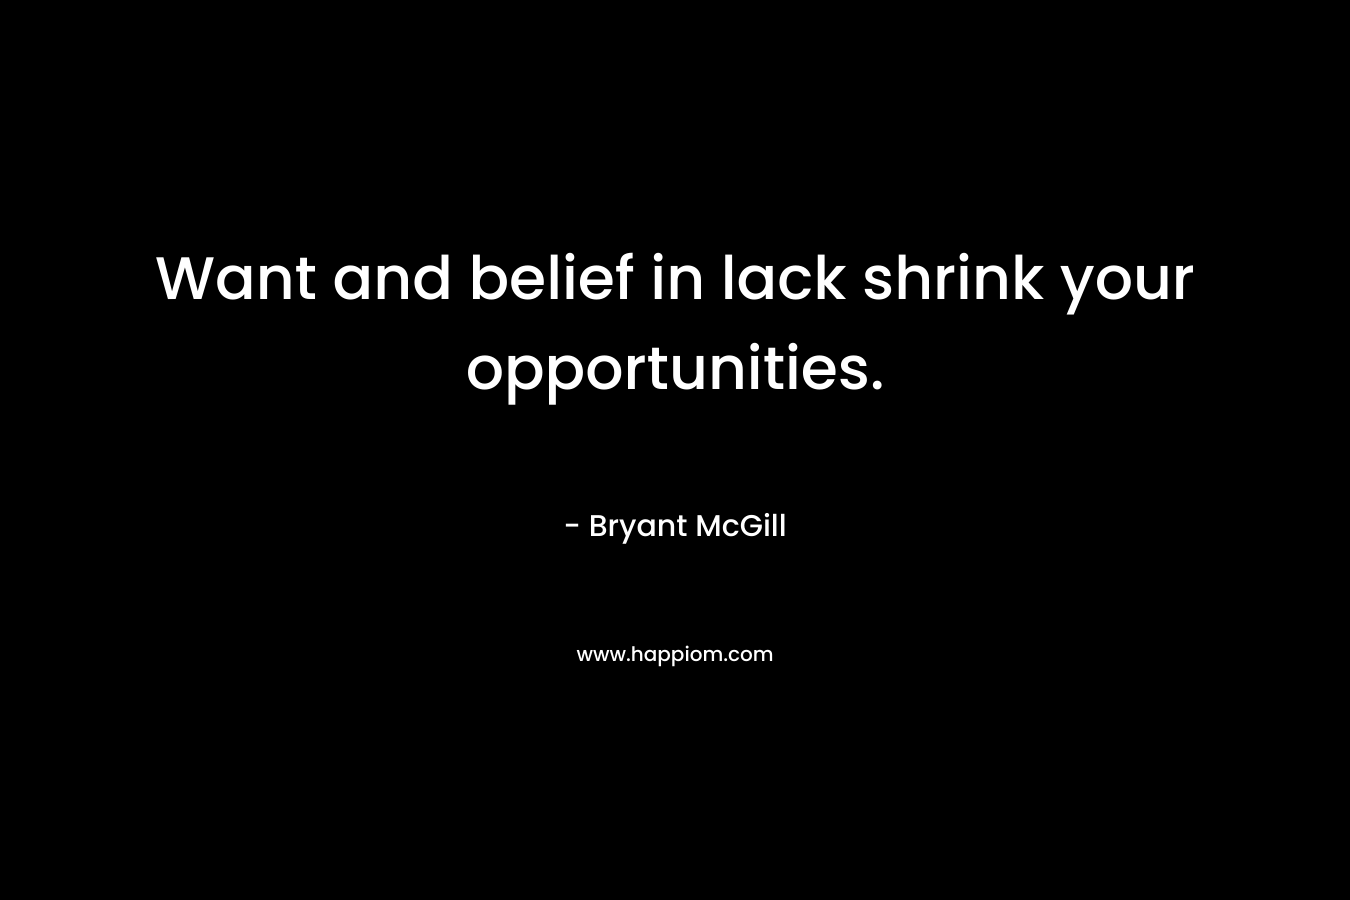 Want and belief in lack shrink your opportunities.